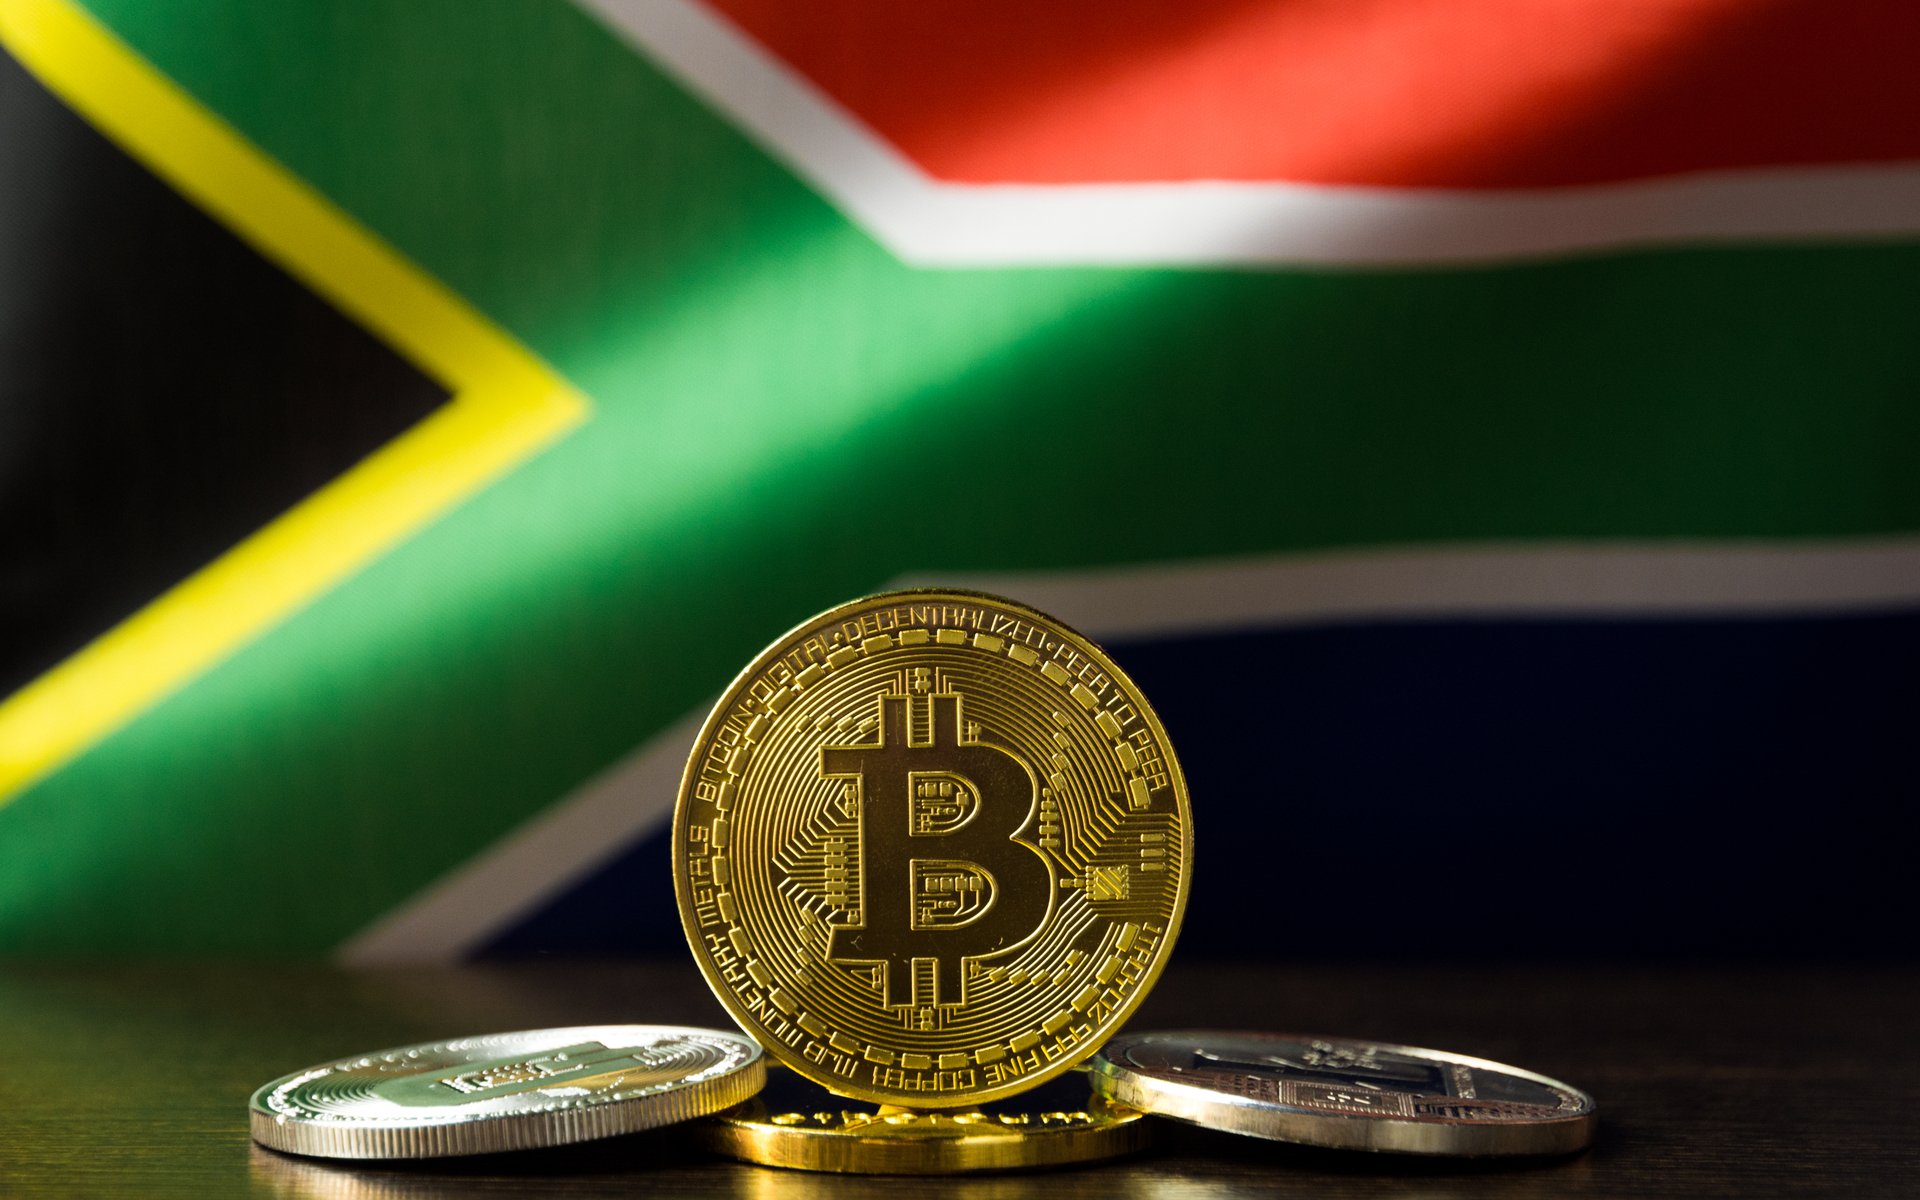 luno bitcoin exchange south africa | bitcoin in south africa | cryptocurrencies in south africa | cryptocurrency in south africa | south africa bitcoin luno | south africa cryptocurrencies luno